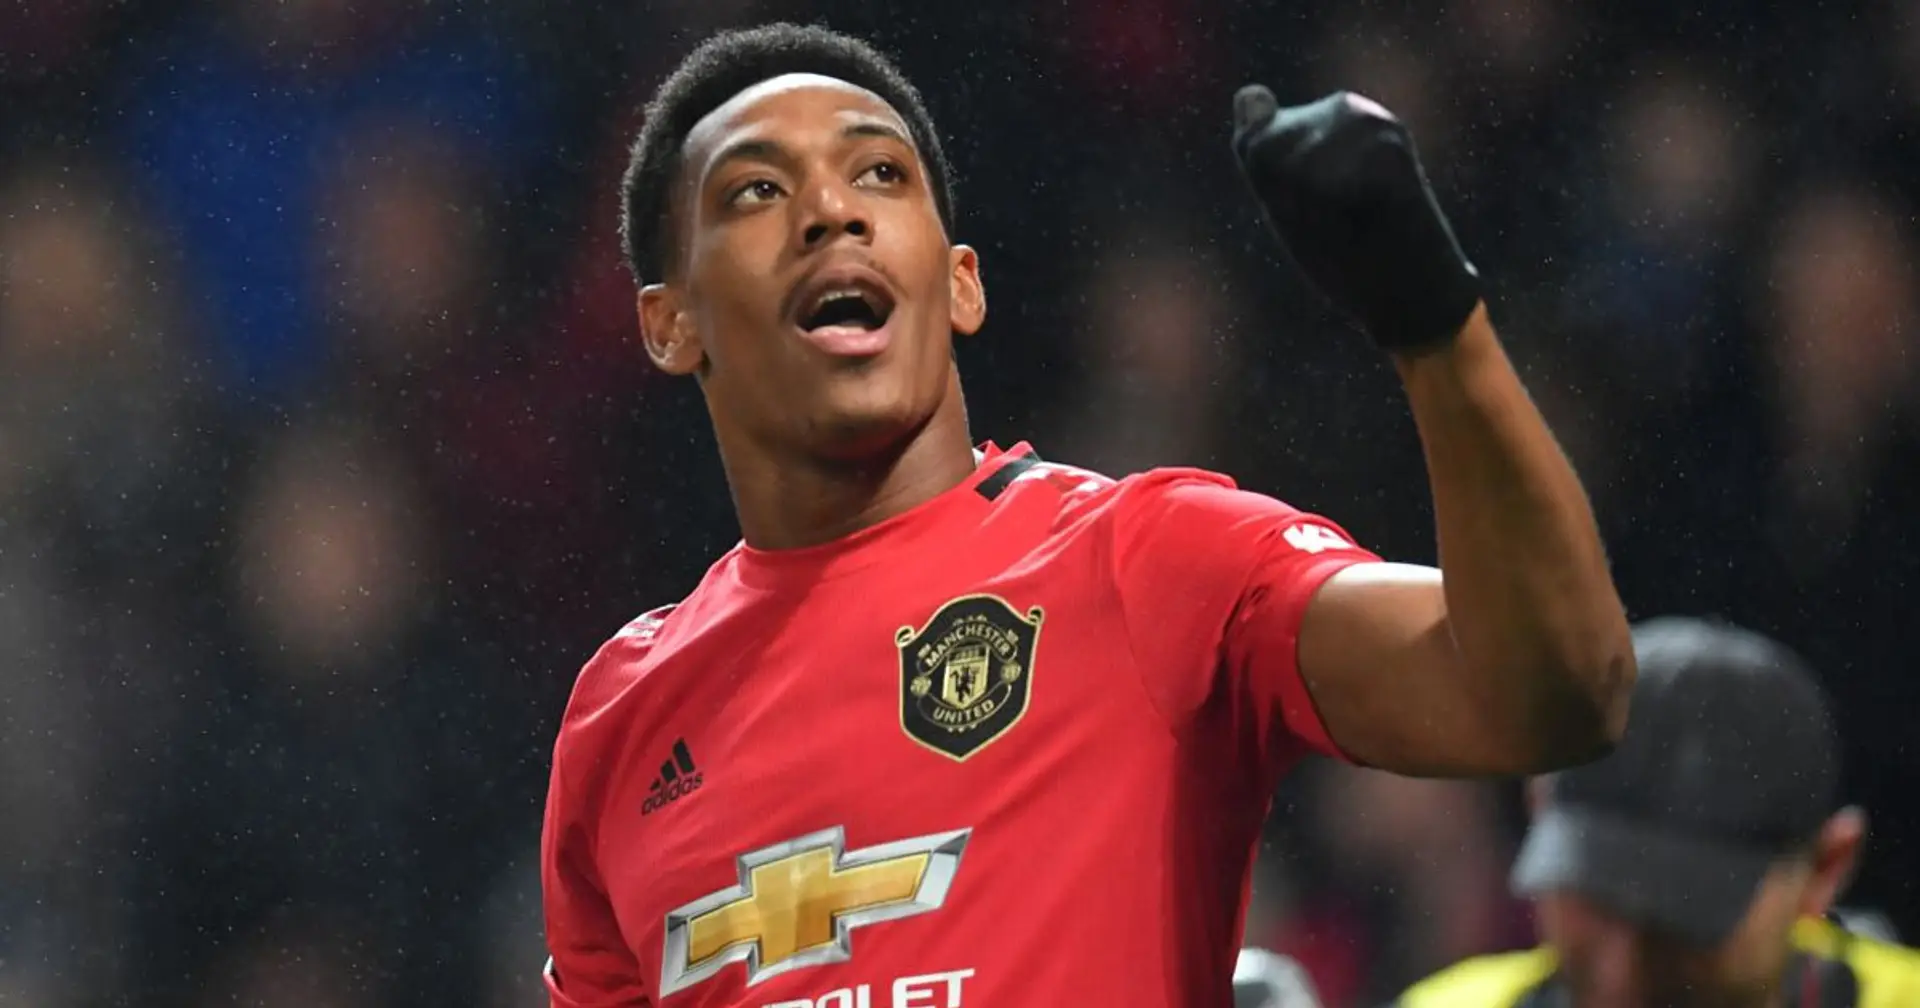 Key stat shows how many points Martial won for United in 2019/20 Premier League campaign